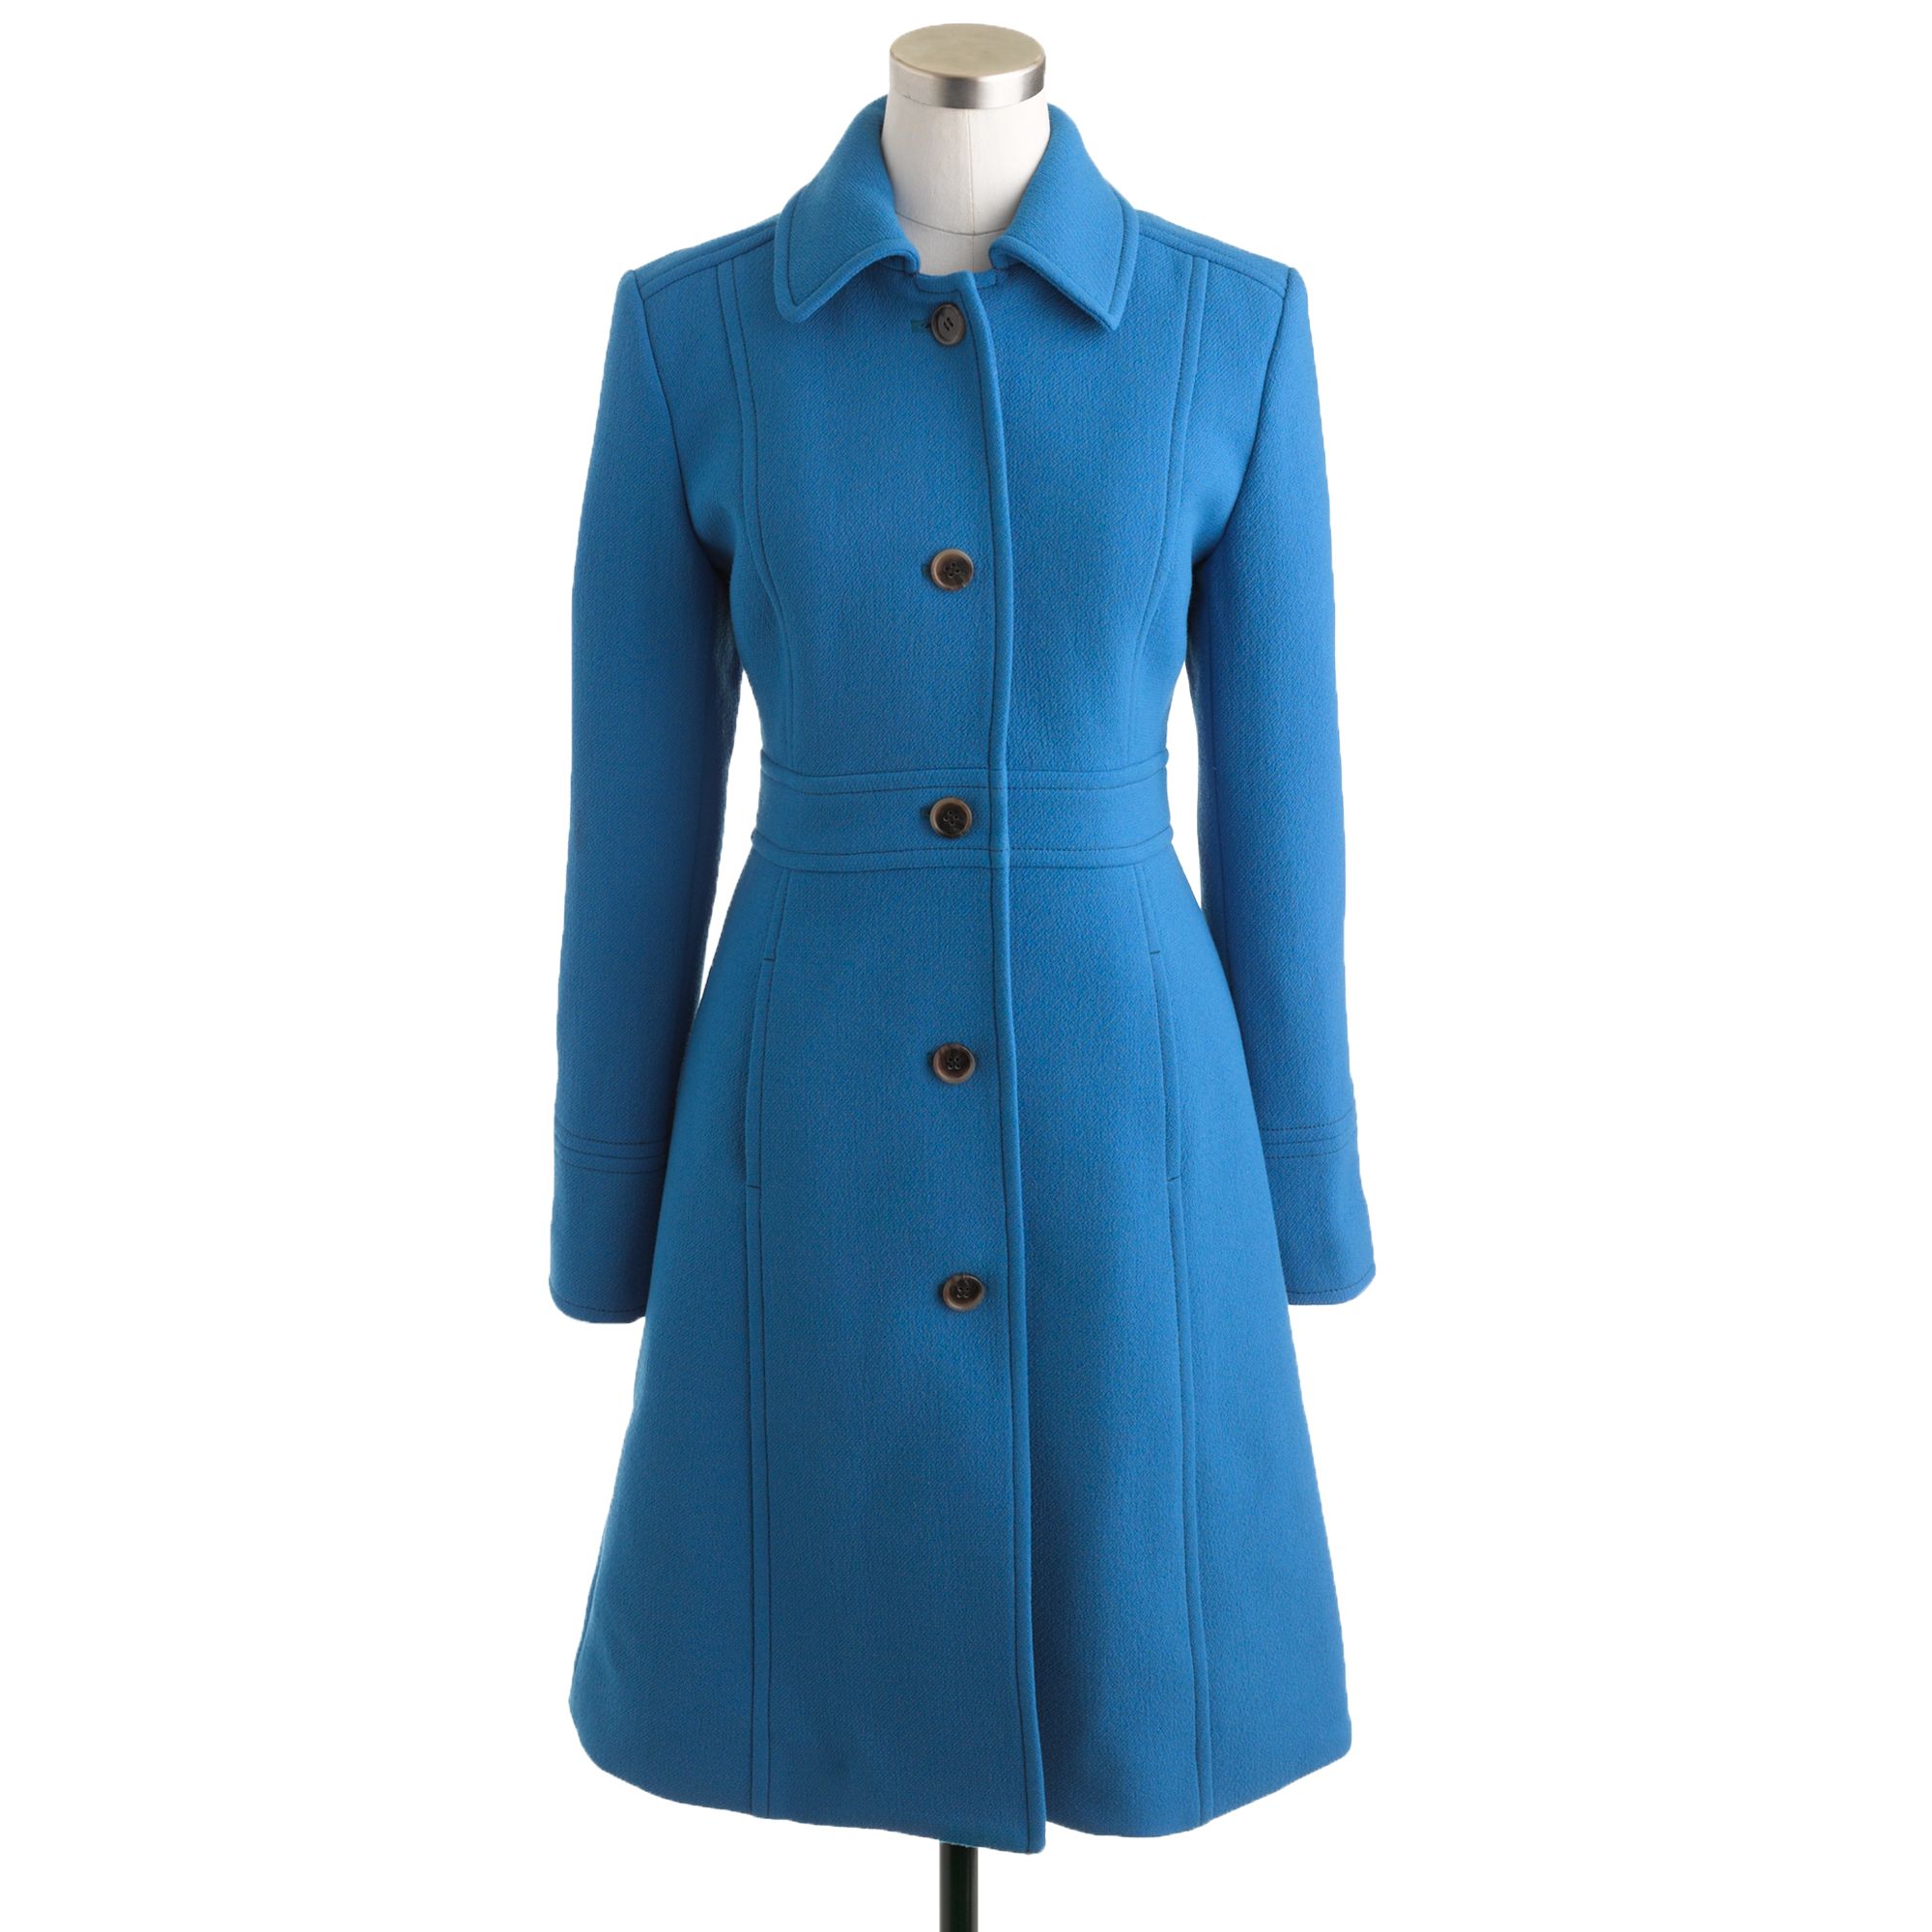 J.crew Doublecloth Lady Day Coat with Thinsulate in Blue (bright azure